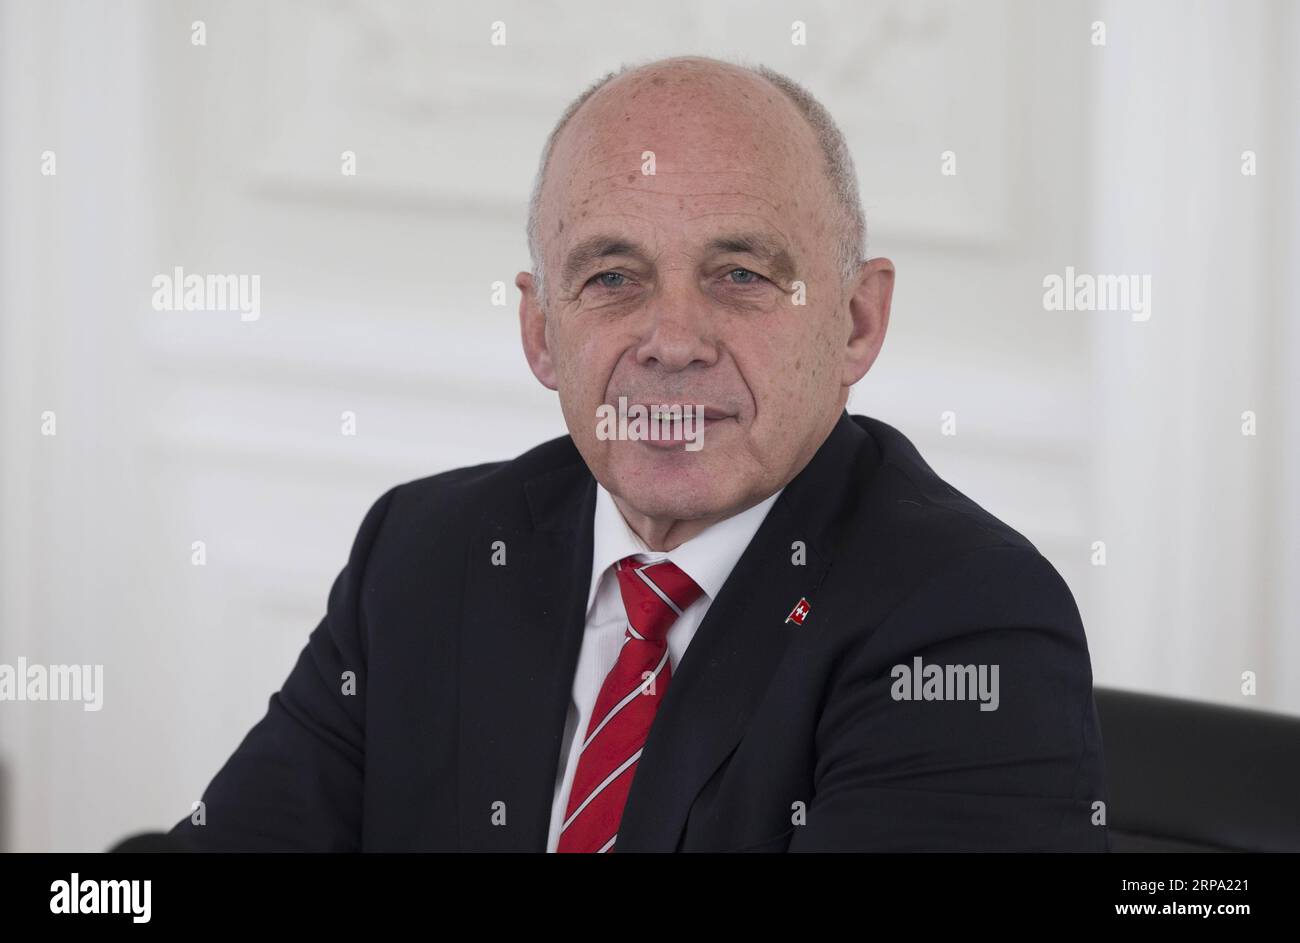 (190422) -- BERN, April 22, 2019 (Xinhua) -- President Ueli Maurer of the Swiss Confederation receives a joint interview with Chinese media in Bern, Switzerland, on April 16, 2019. China s Belt and Road Initiative (BRI) is a fundamental task crucial for generations to come, which, when implemented smoothly, will bring many benefits to both the economic development and the well-being of the people worldwide, Maurer has said. TO GO WITH Interview: BRI crucial for generations to come: President of Swiss Confederation (Xinhua/Xu Jinquan) SWITZERLAND-BERN-UELI MAURER-INTERVIEW PUBLICATIONxNOTxINxCH Stock Photo